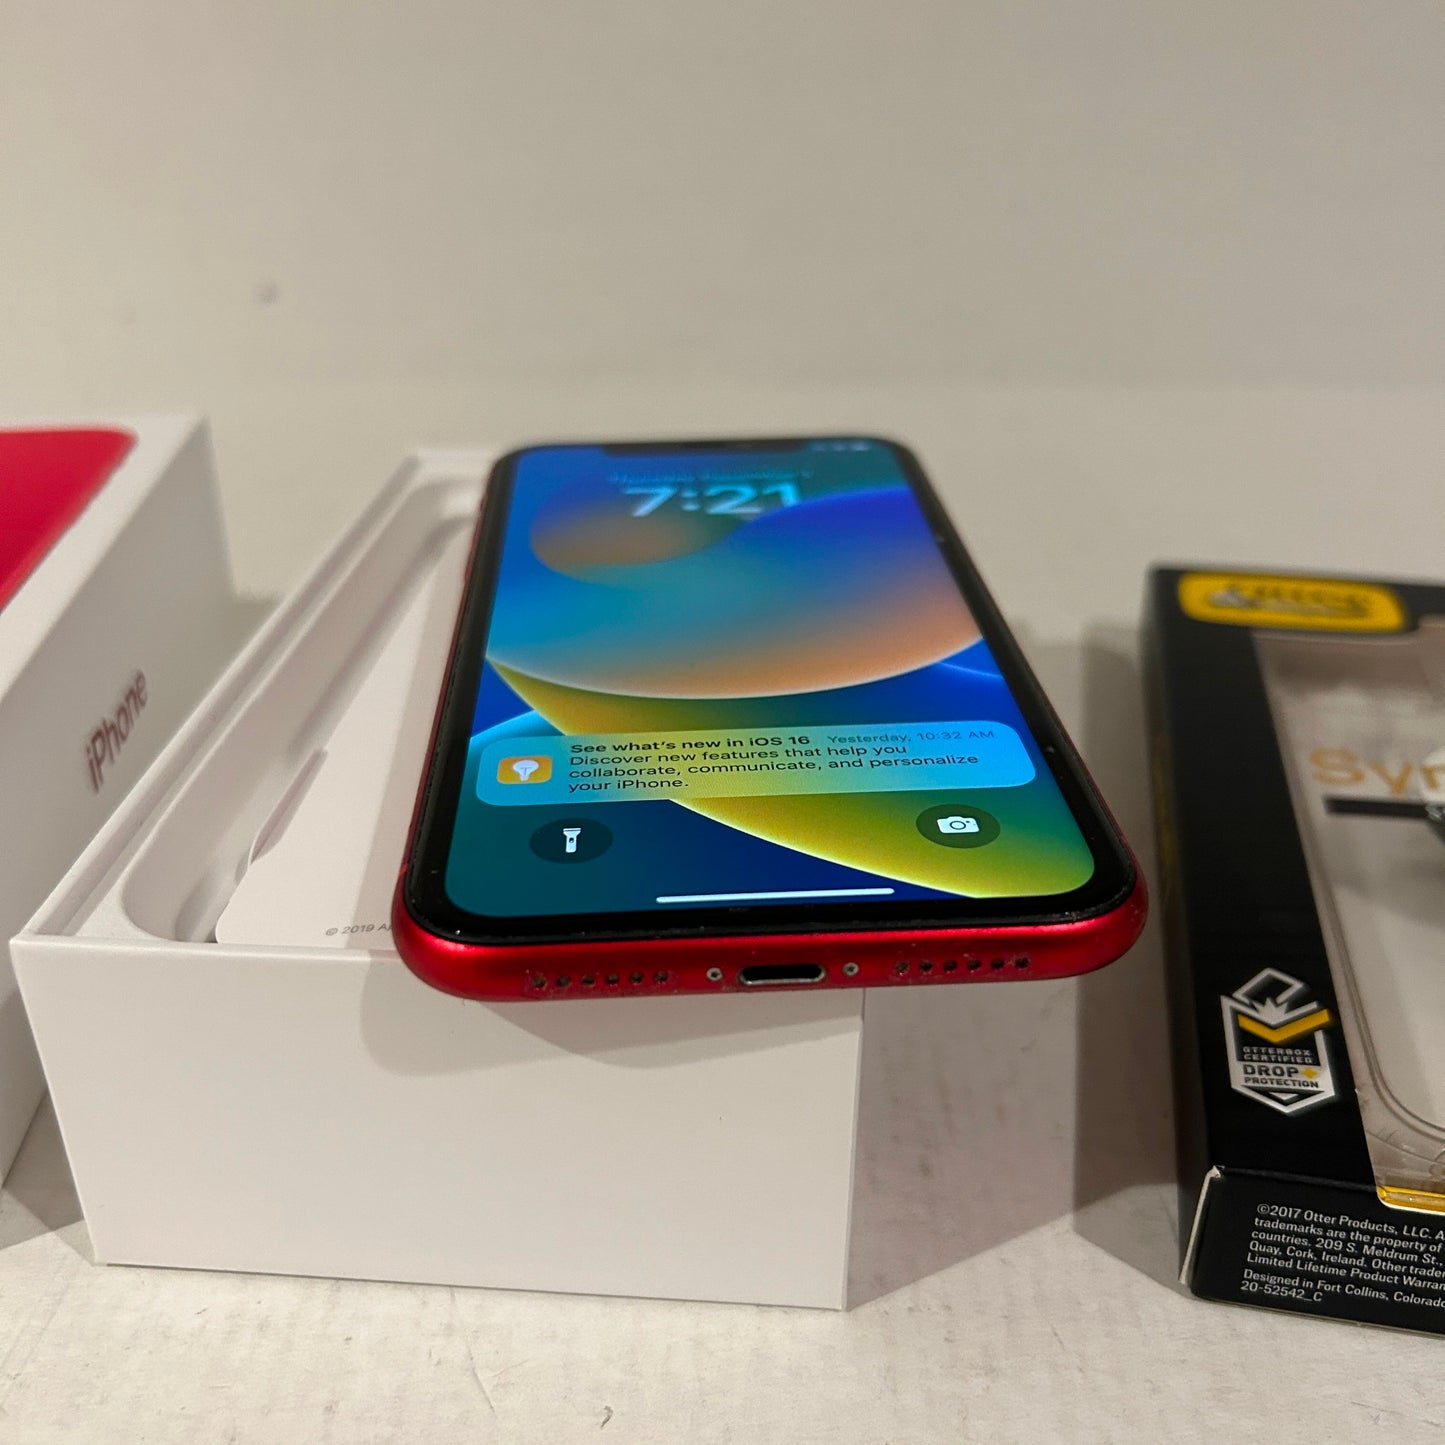 Product Red 128 GB iPhone 11 Rogers